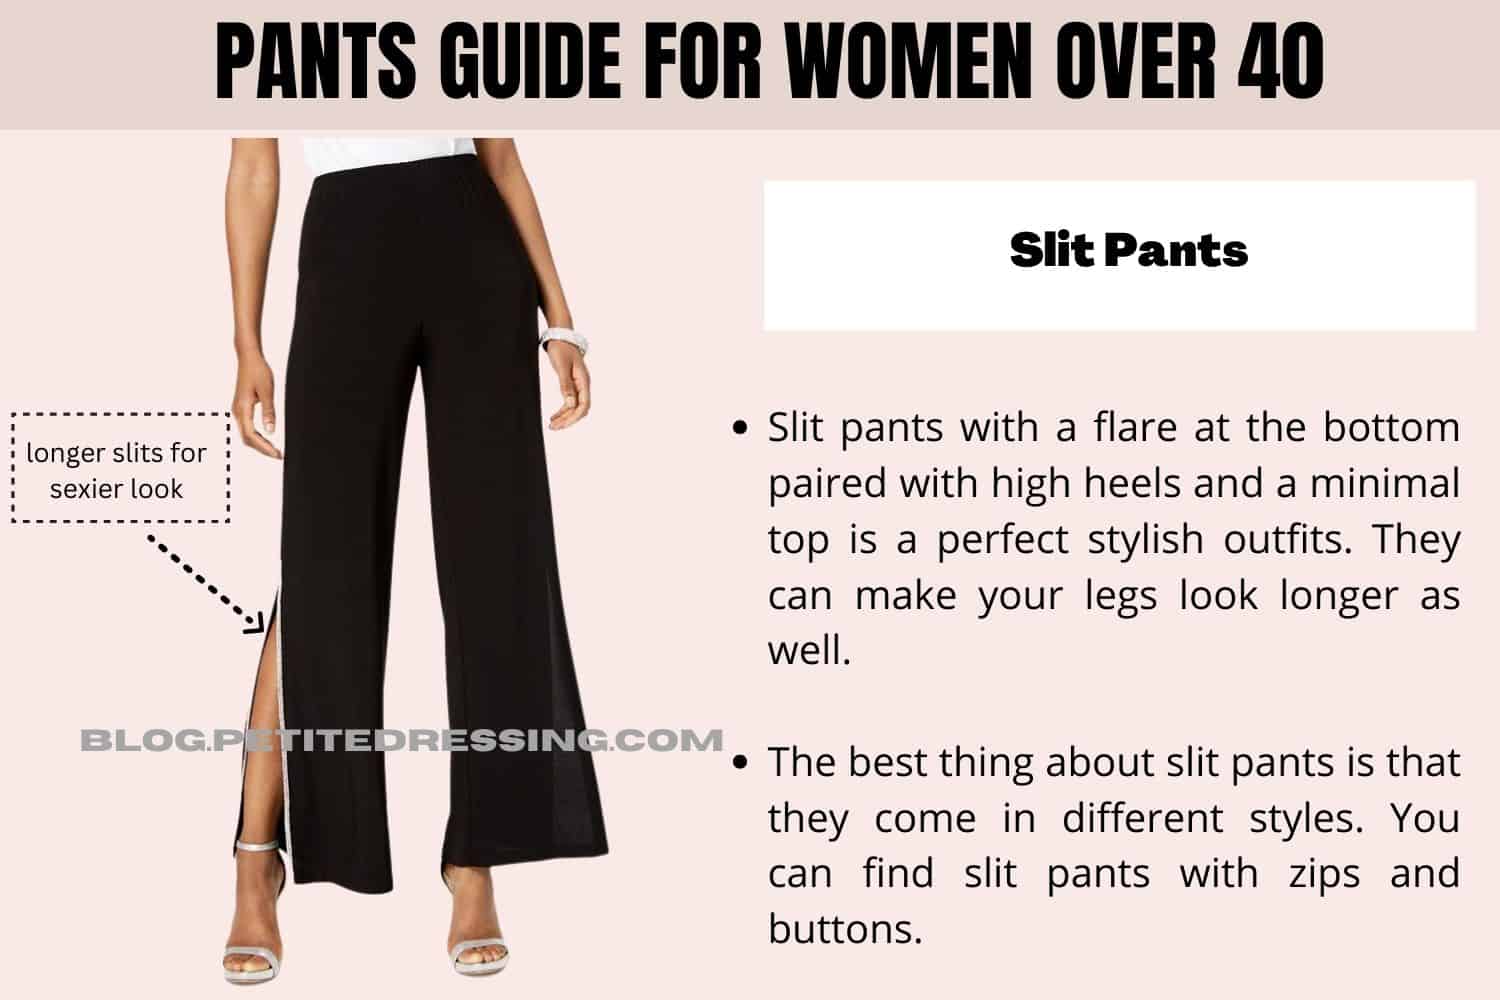 The Complete Pants Guide For Women Over 40